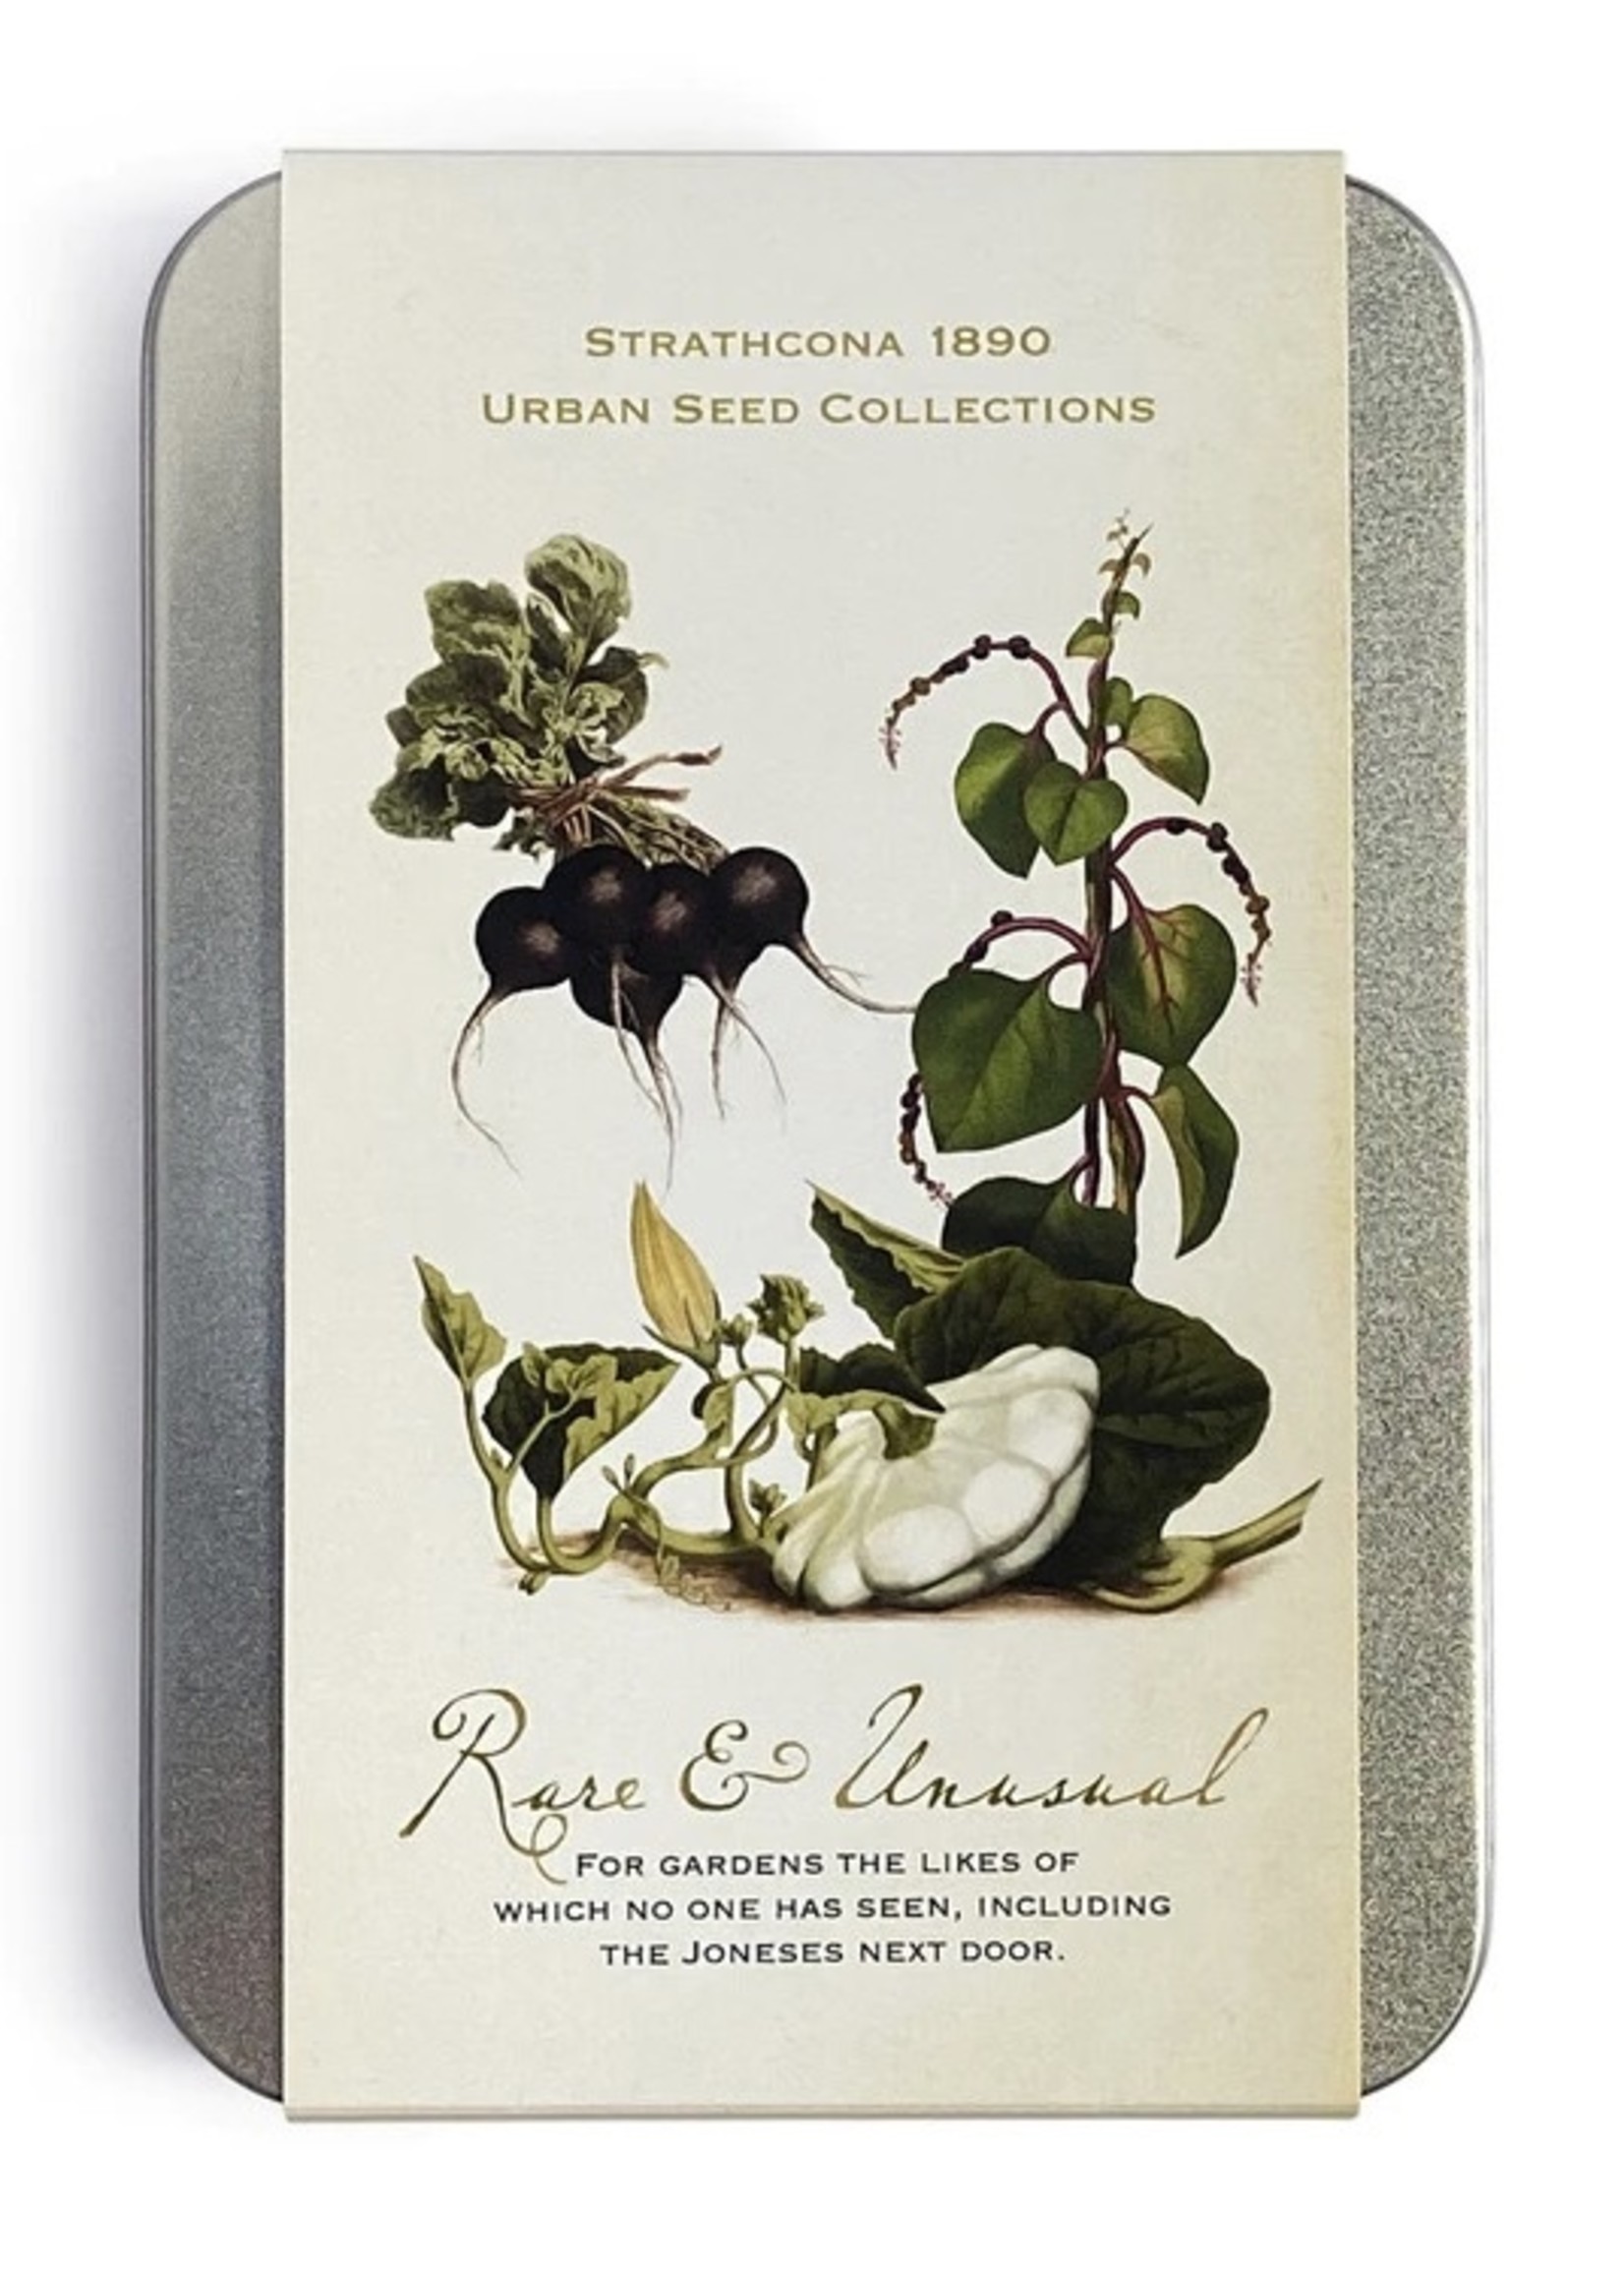 Strathcona 1890 Seed Collections & Growing Kits by Strath1890